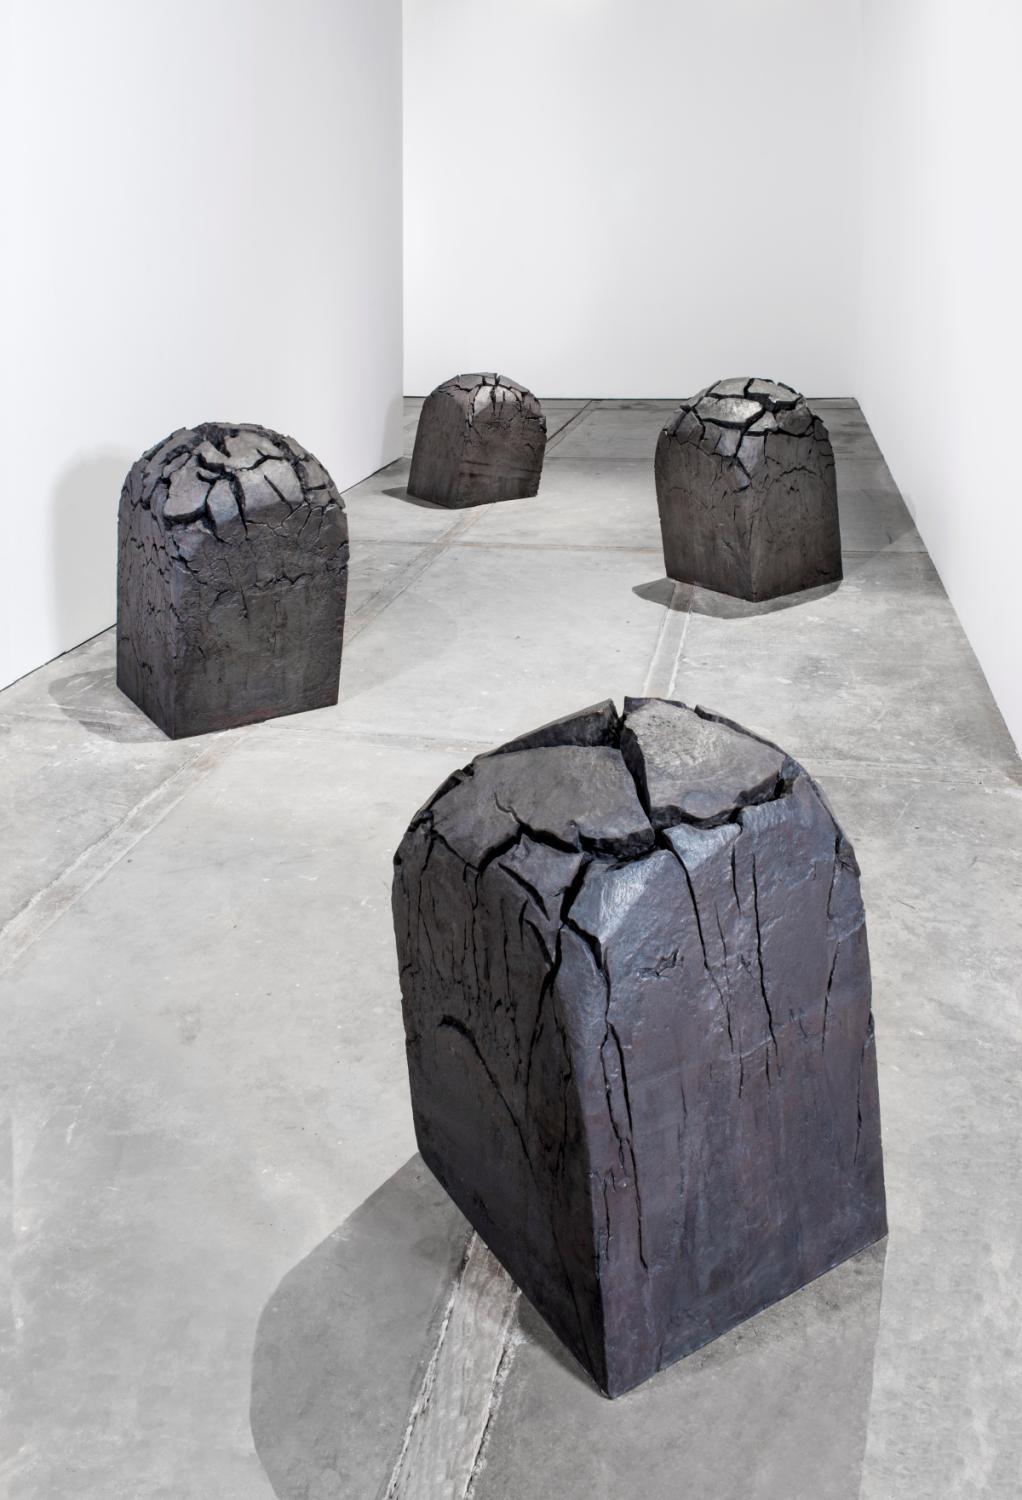 forged and cast iron sculpture, the show highlights iron-inspired photography, video, charred drawings and mixed media installations, including experimental bodies of work in materials newly utilized